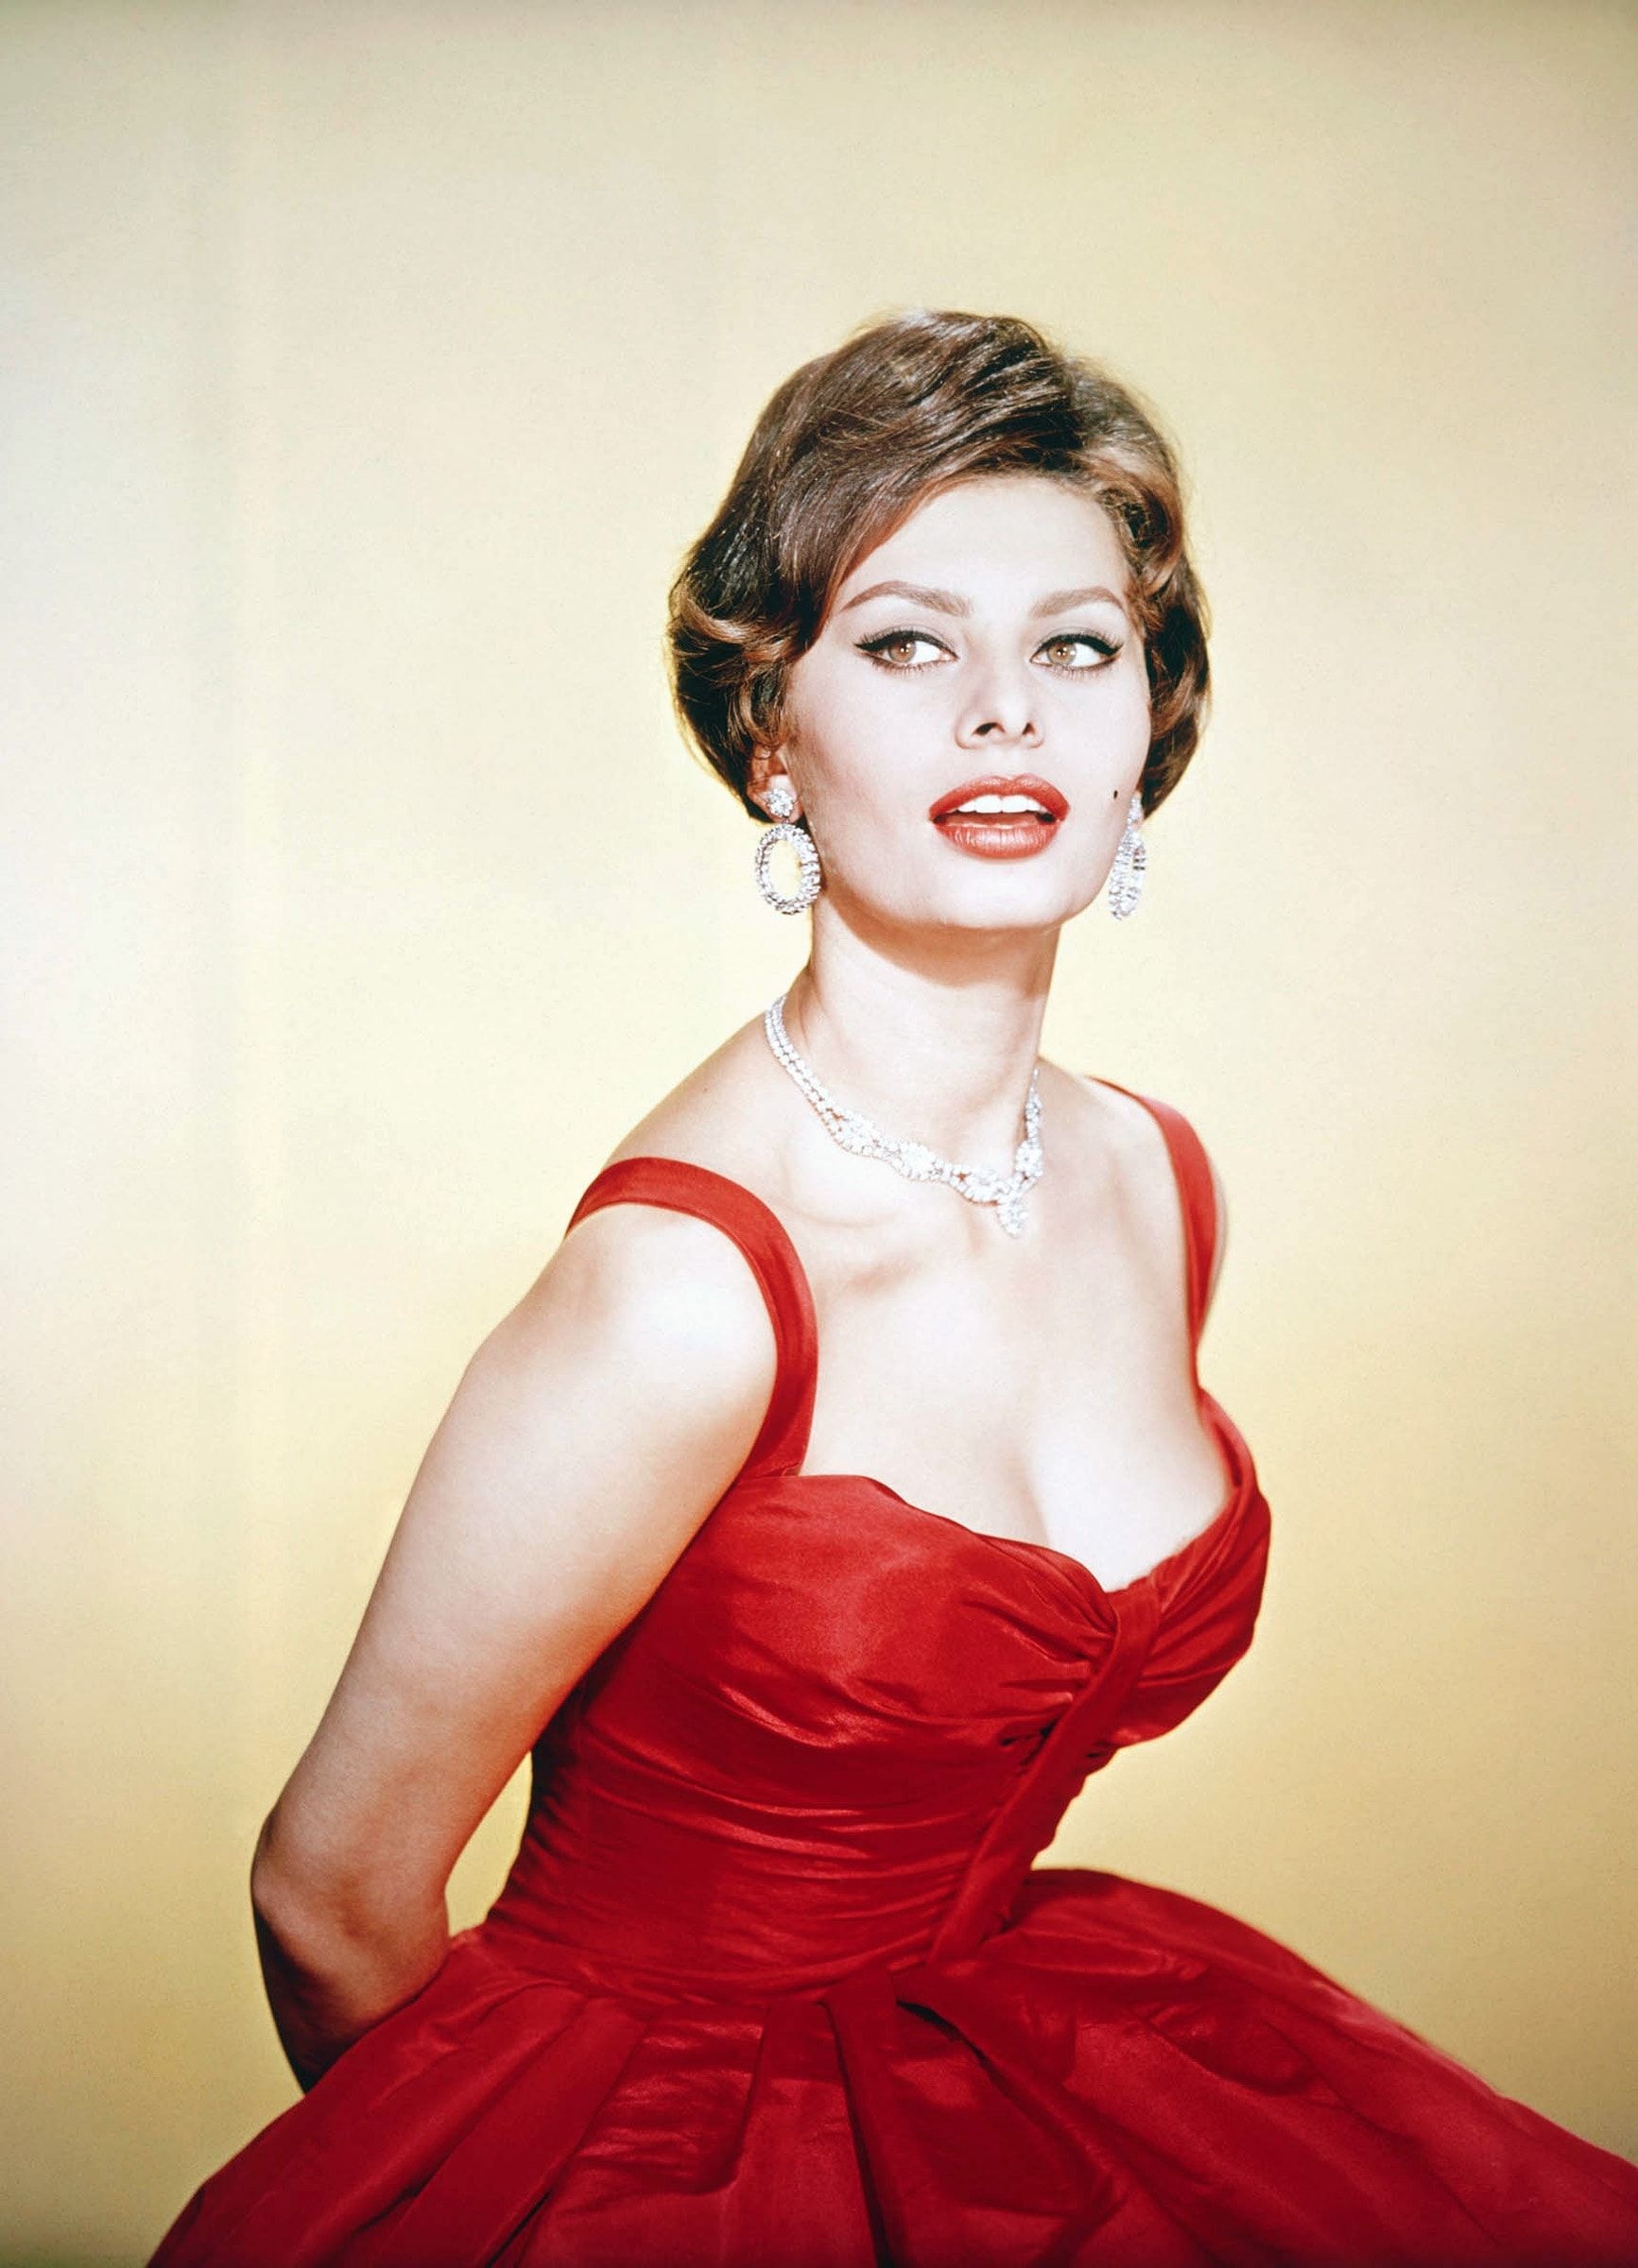 Sophia Loren movies, Top wallpapers, Stunning backgrounds, Classic beauty, 1740x2400 HD Phone